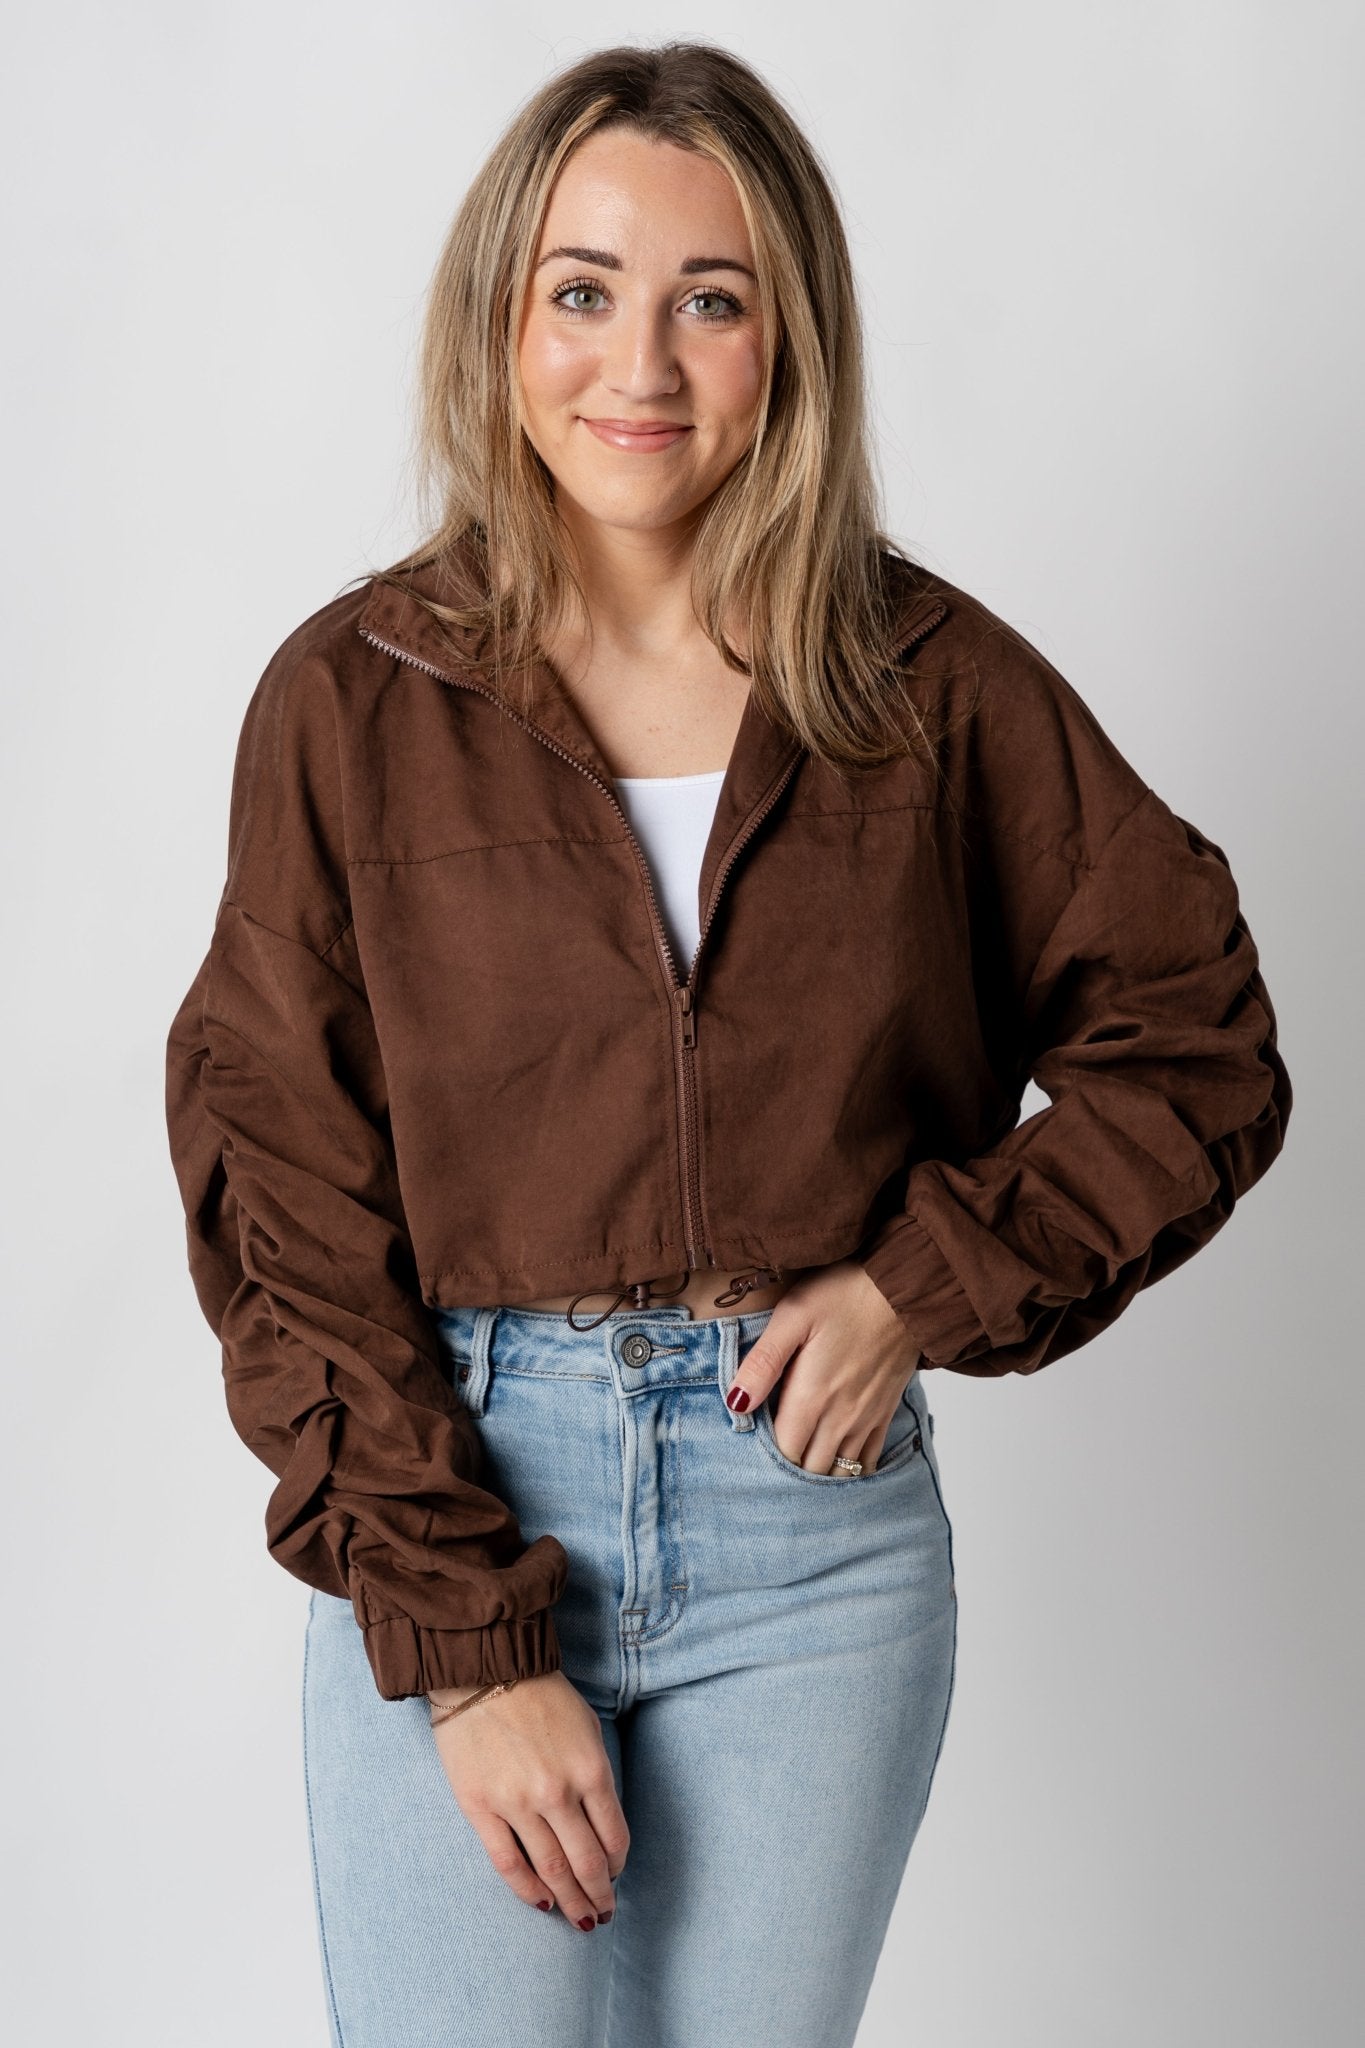 Drawstring crop jacket brown – Affordable Blazers | Cute Black Jackets at Lush Fashion Lounge Boutique in Oklahoma City